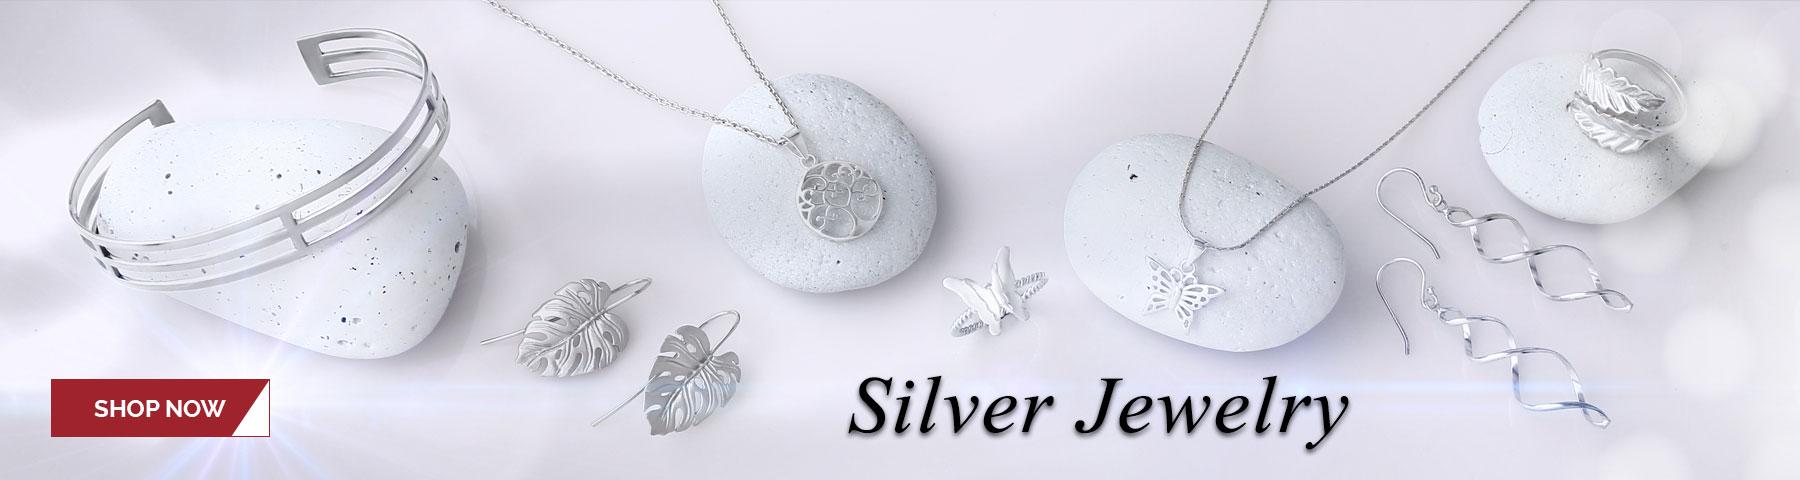 Silver Jewelry: Shop our range of silver jewelry